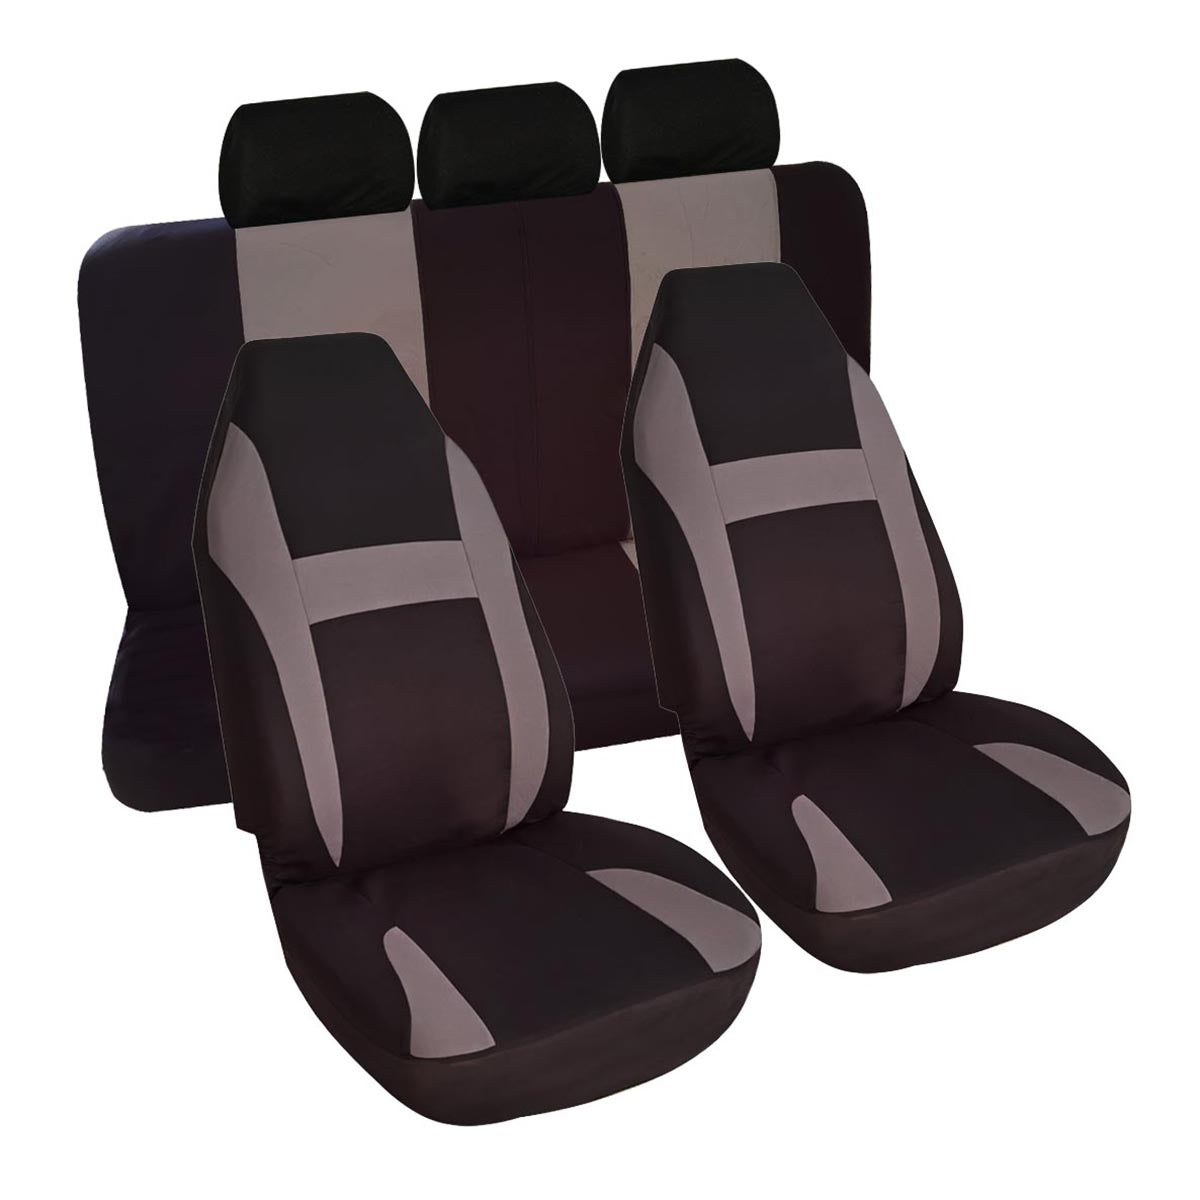 Black 7PCS Universal Front Seat Covers Set Fit For Auto Car SUV Trucks